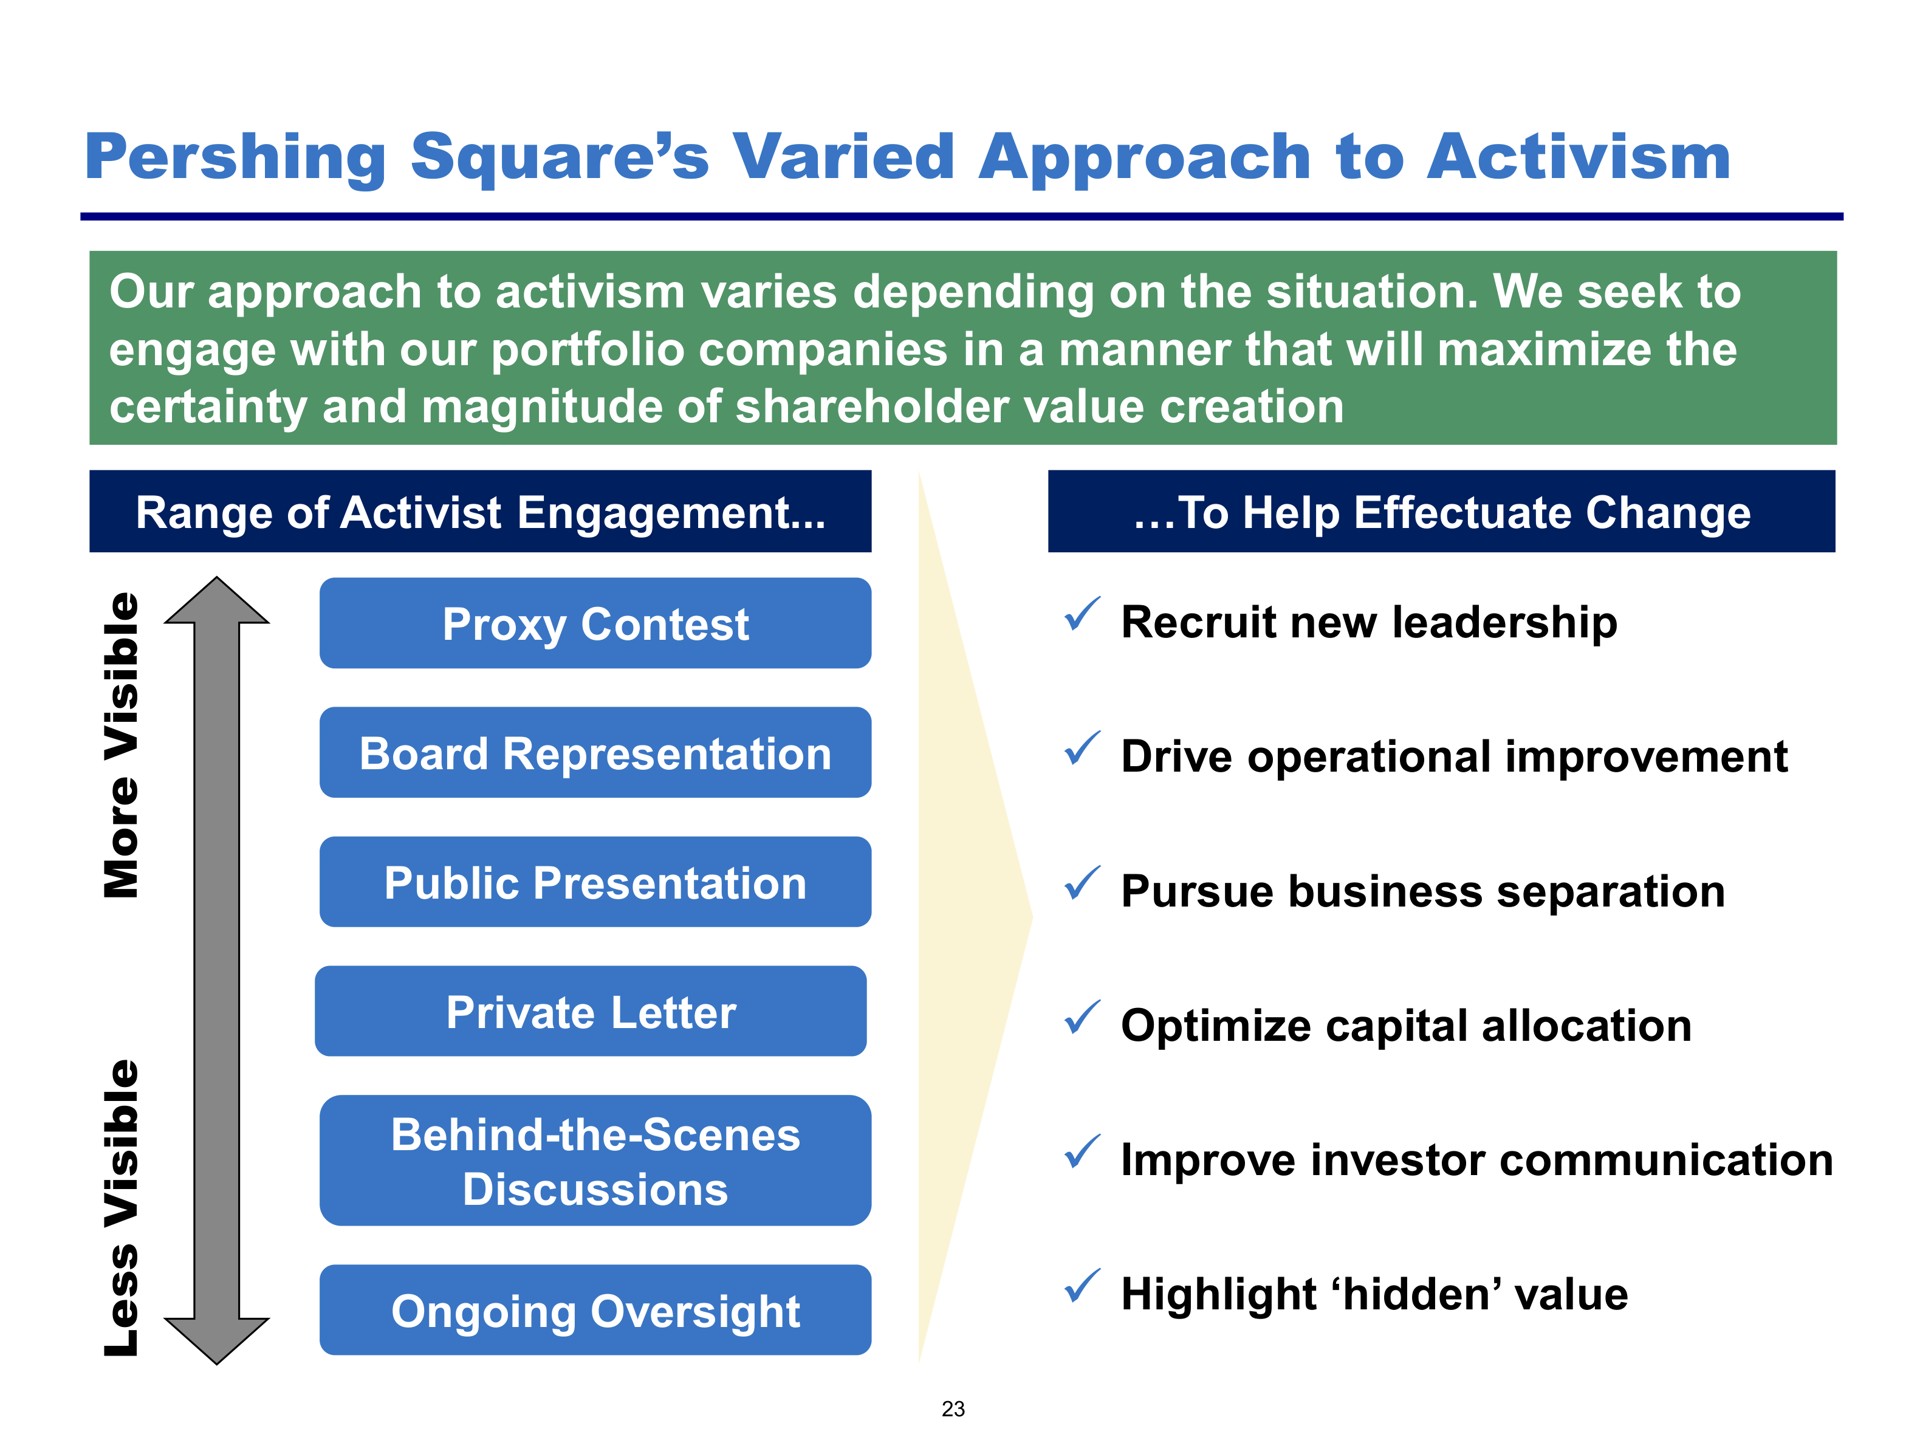 square varied approach to activism proxy contest recruit new leadership optimize capital allocation private letter highlight hidden value | Pershing Square